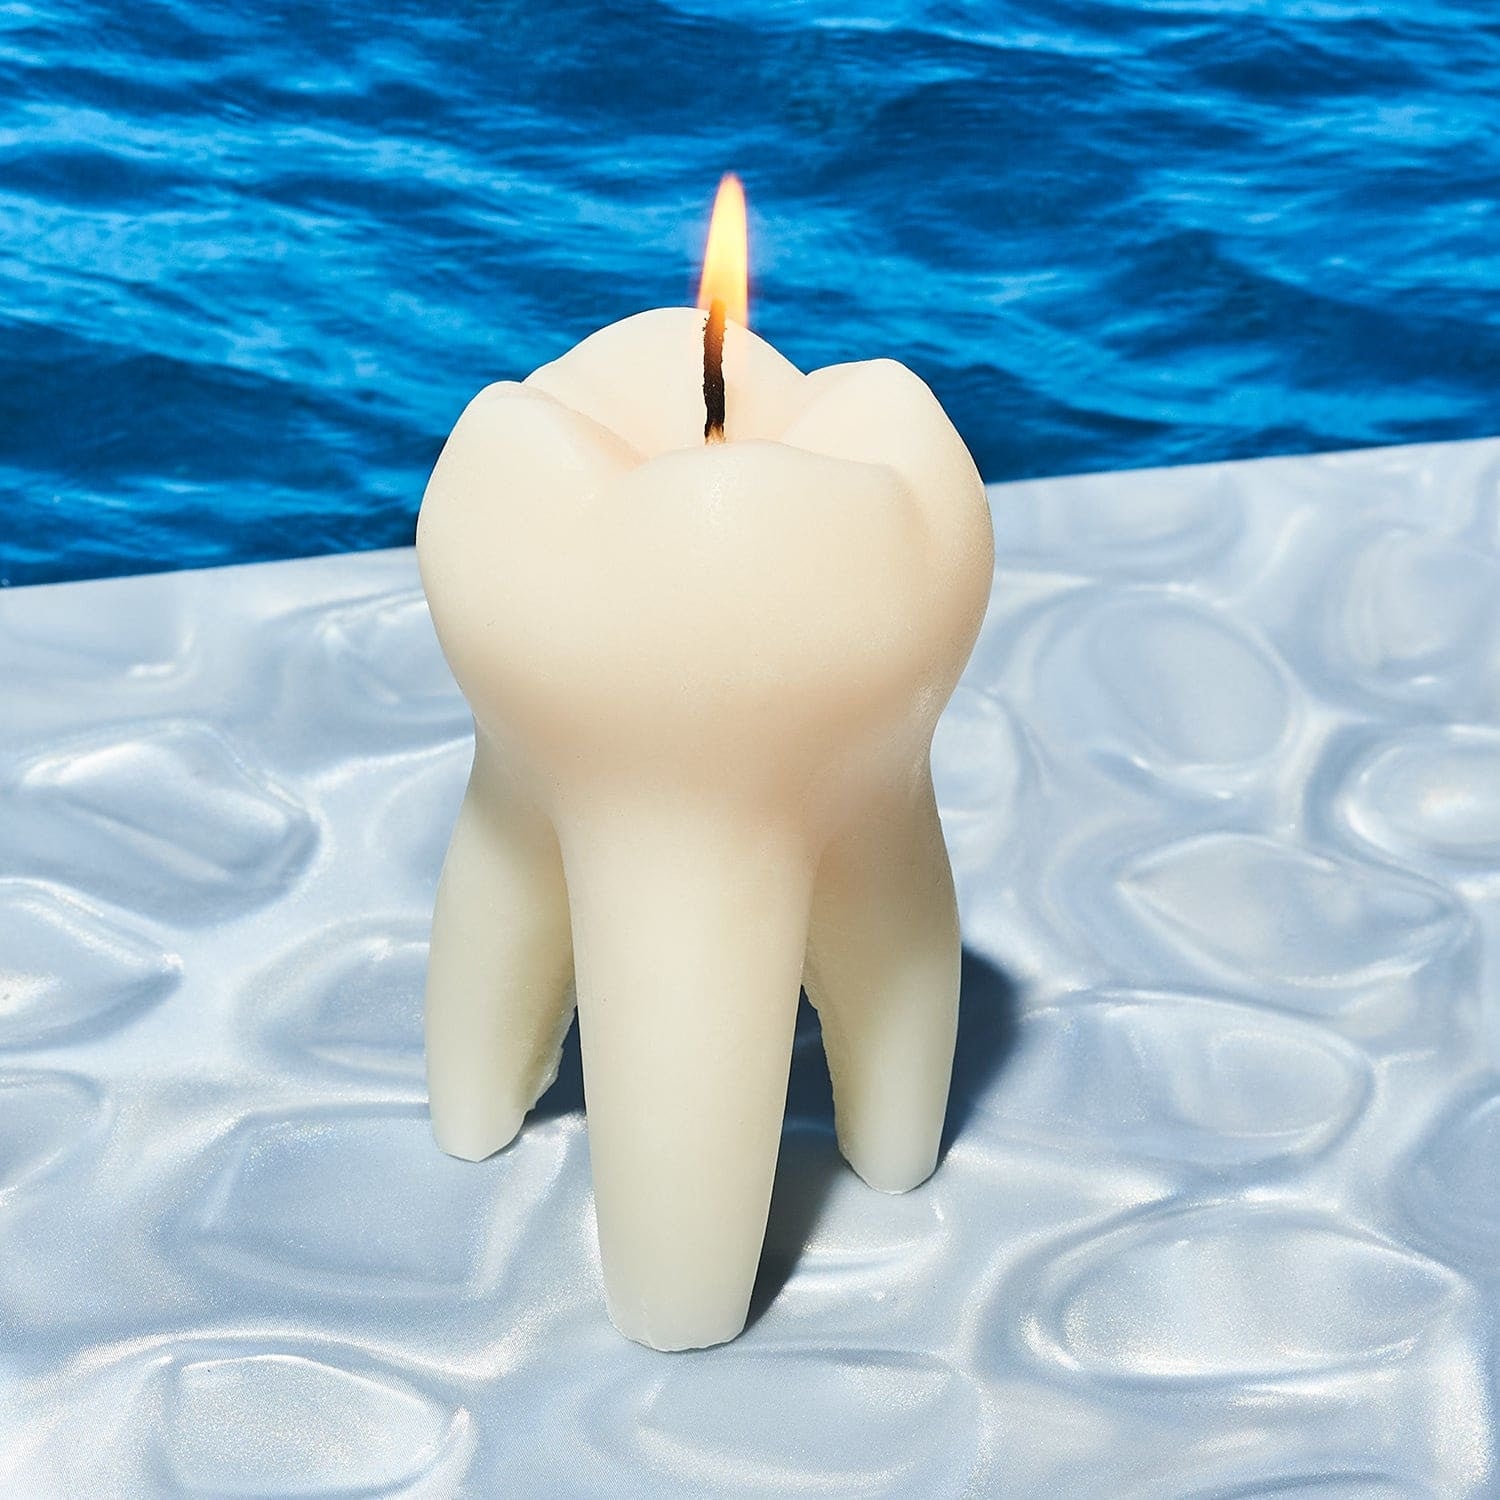 Tooth Candle Candle - Coconut Wax - Maximalism - Maximalist